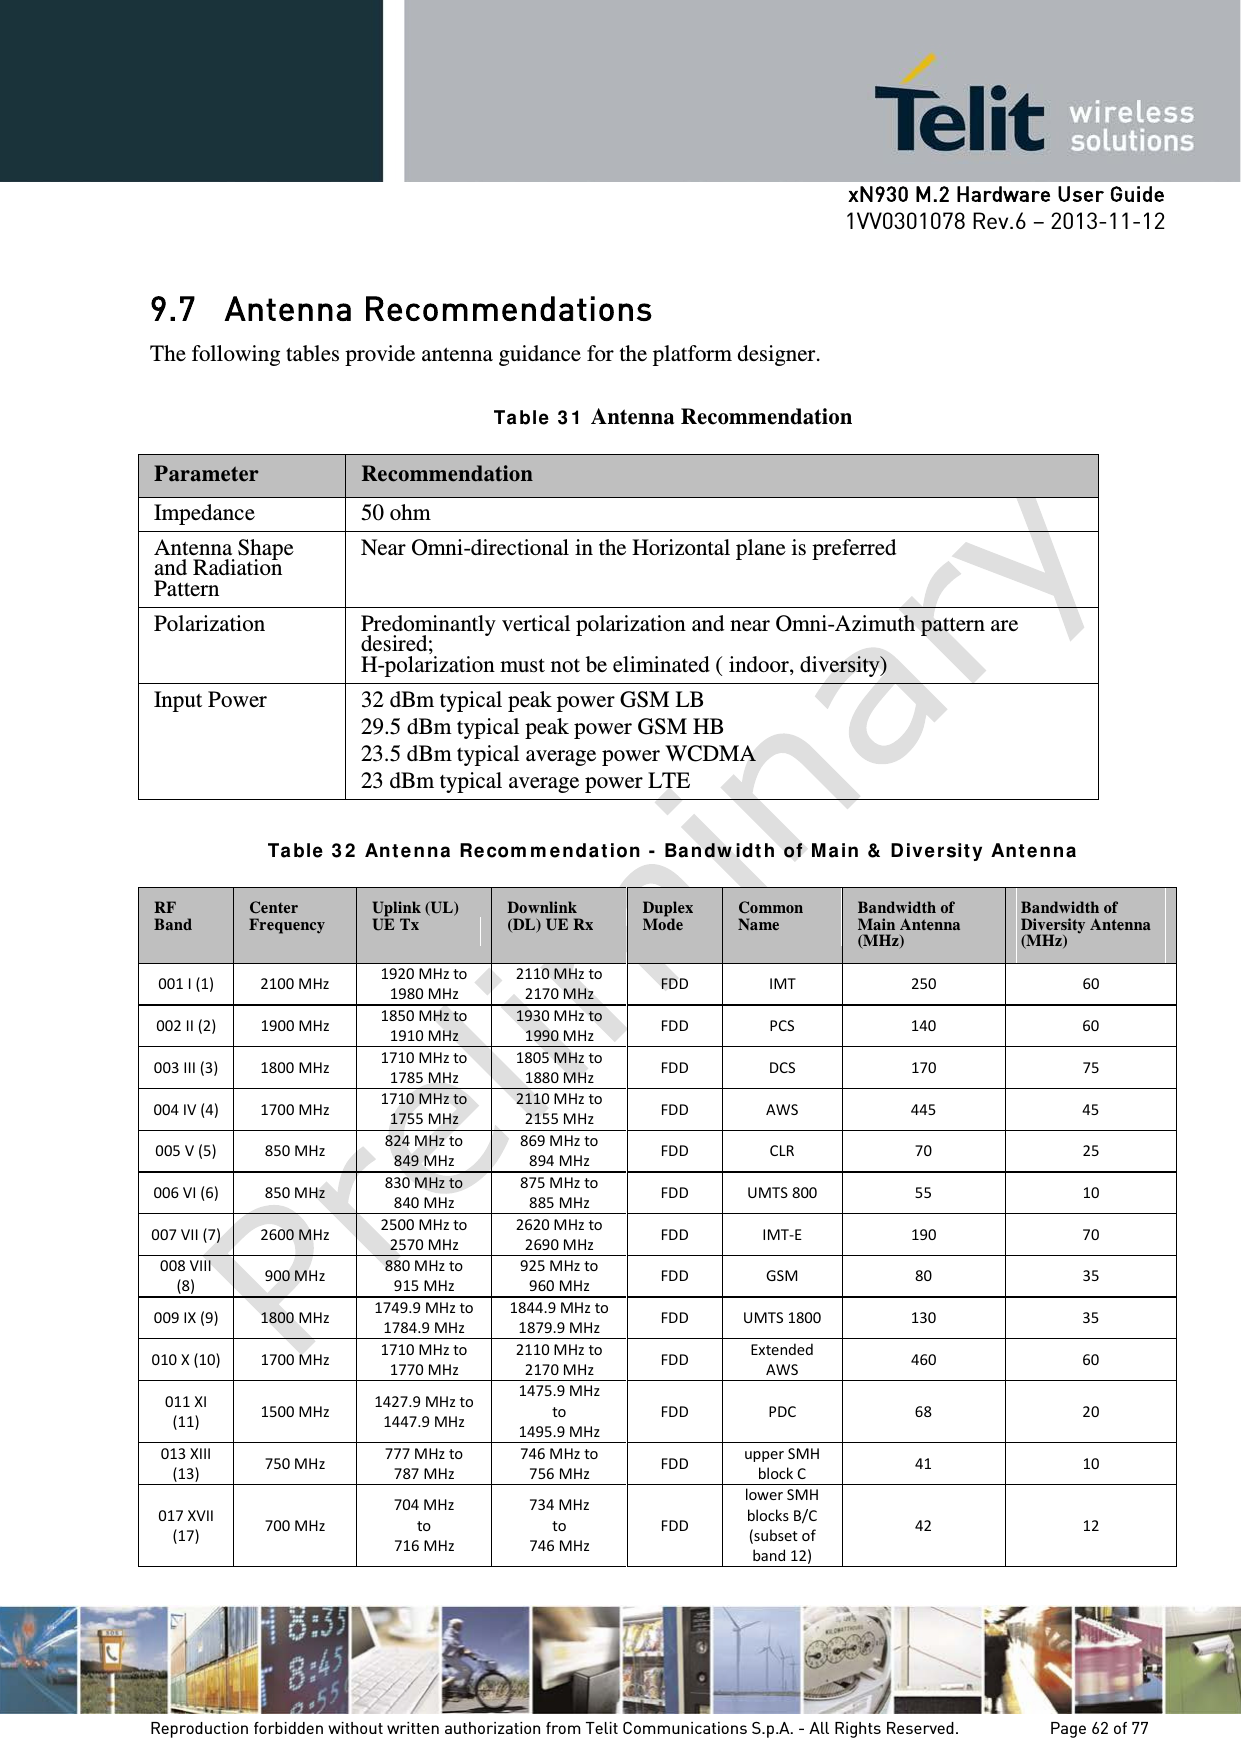      xN930 M.2 Hardware User Guide 1VV0301078 Rev.6 – 2013-11-12    9.7 Antenna Recommendations The following tables provide antenna guidance for the platform designer.    Ta ble  3 1  Antenna Recommendation Parameter Recommendation Impedance 50 ohm Antenna Shape and Radiation Pattern Near Omni-directional in the Horizontal plane is preferred Polarization Predominantly vertical polarization and near Omni-Azimuth pattern are desired;  H-polarization must not be eliminated ( indoor, diversity) Input Power 32 dBm typical peak power GSM LB 29.5 dBm typical peak power GSM HB 23.5 dBm typical average power WCDMA 23 dBm typical average power LTE  Ta ble  3 2  Ant e nna  Recom m e nda t ion  -  Ba n dw idt h of M a in &amp;  D iver sit y  Ant enna  RF Band Center Frequency Uplink (UL) UE Tx Downlink (DL) UE Rx Duplex Mode Common Name Bandwidth of Main Antenna (MHz) Bandwidth of Diversity Antenna (MHz) 001 I (1) 2100 MHz 1920 MHz to 1980 MHz 2110 MHz to 2170 MHz FDD IMT 250 60 002 II (2) 1900 MHz 1850 MHz to 1910 MHz 1930 MHz to 1990 MHz FDD PCS 140 60 003 III (3) 1800 MHz 1710 MHz to 1785 MHz 1805 MHz to 1880 MHz FDD DCS 170 75 004 IV (4) 1700 MHz 1710 MHz to 1755 MHz 2110 MHz to 2155 MHz FDD AWS 445 45 005 V (5) 850 MHz 824 MHz to 849 MHz 869 MHz to 894 MHz FDD CLR 70 25 006 VI (6) 850 MHz 830 MHz to 840 MHz 875 MHz to 885 MHz FDD UMTS 800 55 10 007 VII (7) 2600 MHz 2500 MHz to 2570 MHz 2620 MHz to 2690 MHz FDD IMT-E  190 70 008 VIII (8) 900 MHz 880 MHz to 915 MHz 925 MHz to 960 MHz FDD GSM 80 35 009 IX (9) 1800 MHz 1749.9 MHz to 1784.9 MHz 1844.9 MHz to 1879.9 MHz FDD UMTS 1800 130 35 010 X (10) 1700 MHz 1710 MHz to 1770 MHz 2110 MHz to 2170 MHz FDD Extended AWS 460 60 011 XI (11) 1500 MHz 1427.9 MHz to 1447.9 MHz 1475.9 MHz  to  1495.9 MHz FDD PDC 68 20 013 XIII (13) 750 MHz 777 MHz to 787 MHz 746 MHz to 756 MHz FDD upper SMH block C 41 10 017 XVII (17) 700 MHz 704 MHz  to  716 MHz 734 MHz  to  746 MHz FDD lower SMH blocks B/C (subset of  band 12) 42 12   Reproduction forbidden without written authorization from Telit Communications S.p.A. - All Rights Reserved.    Page 62 of 77 